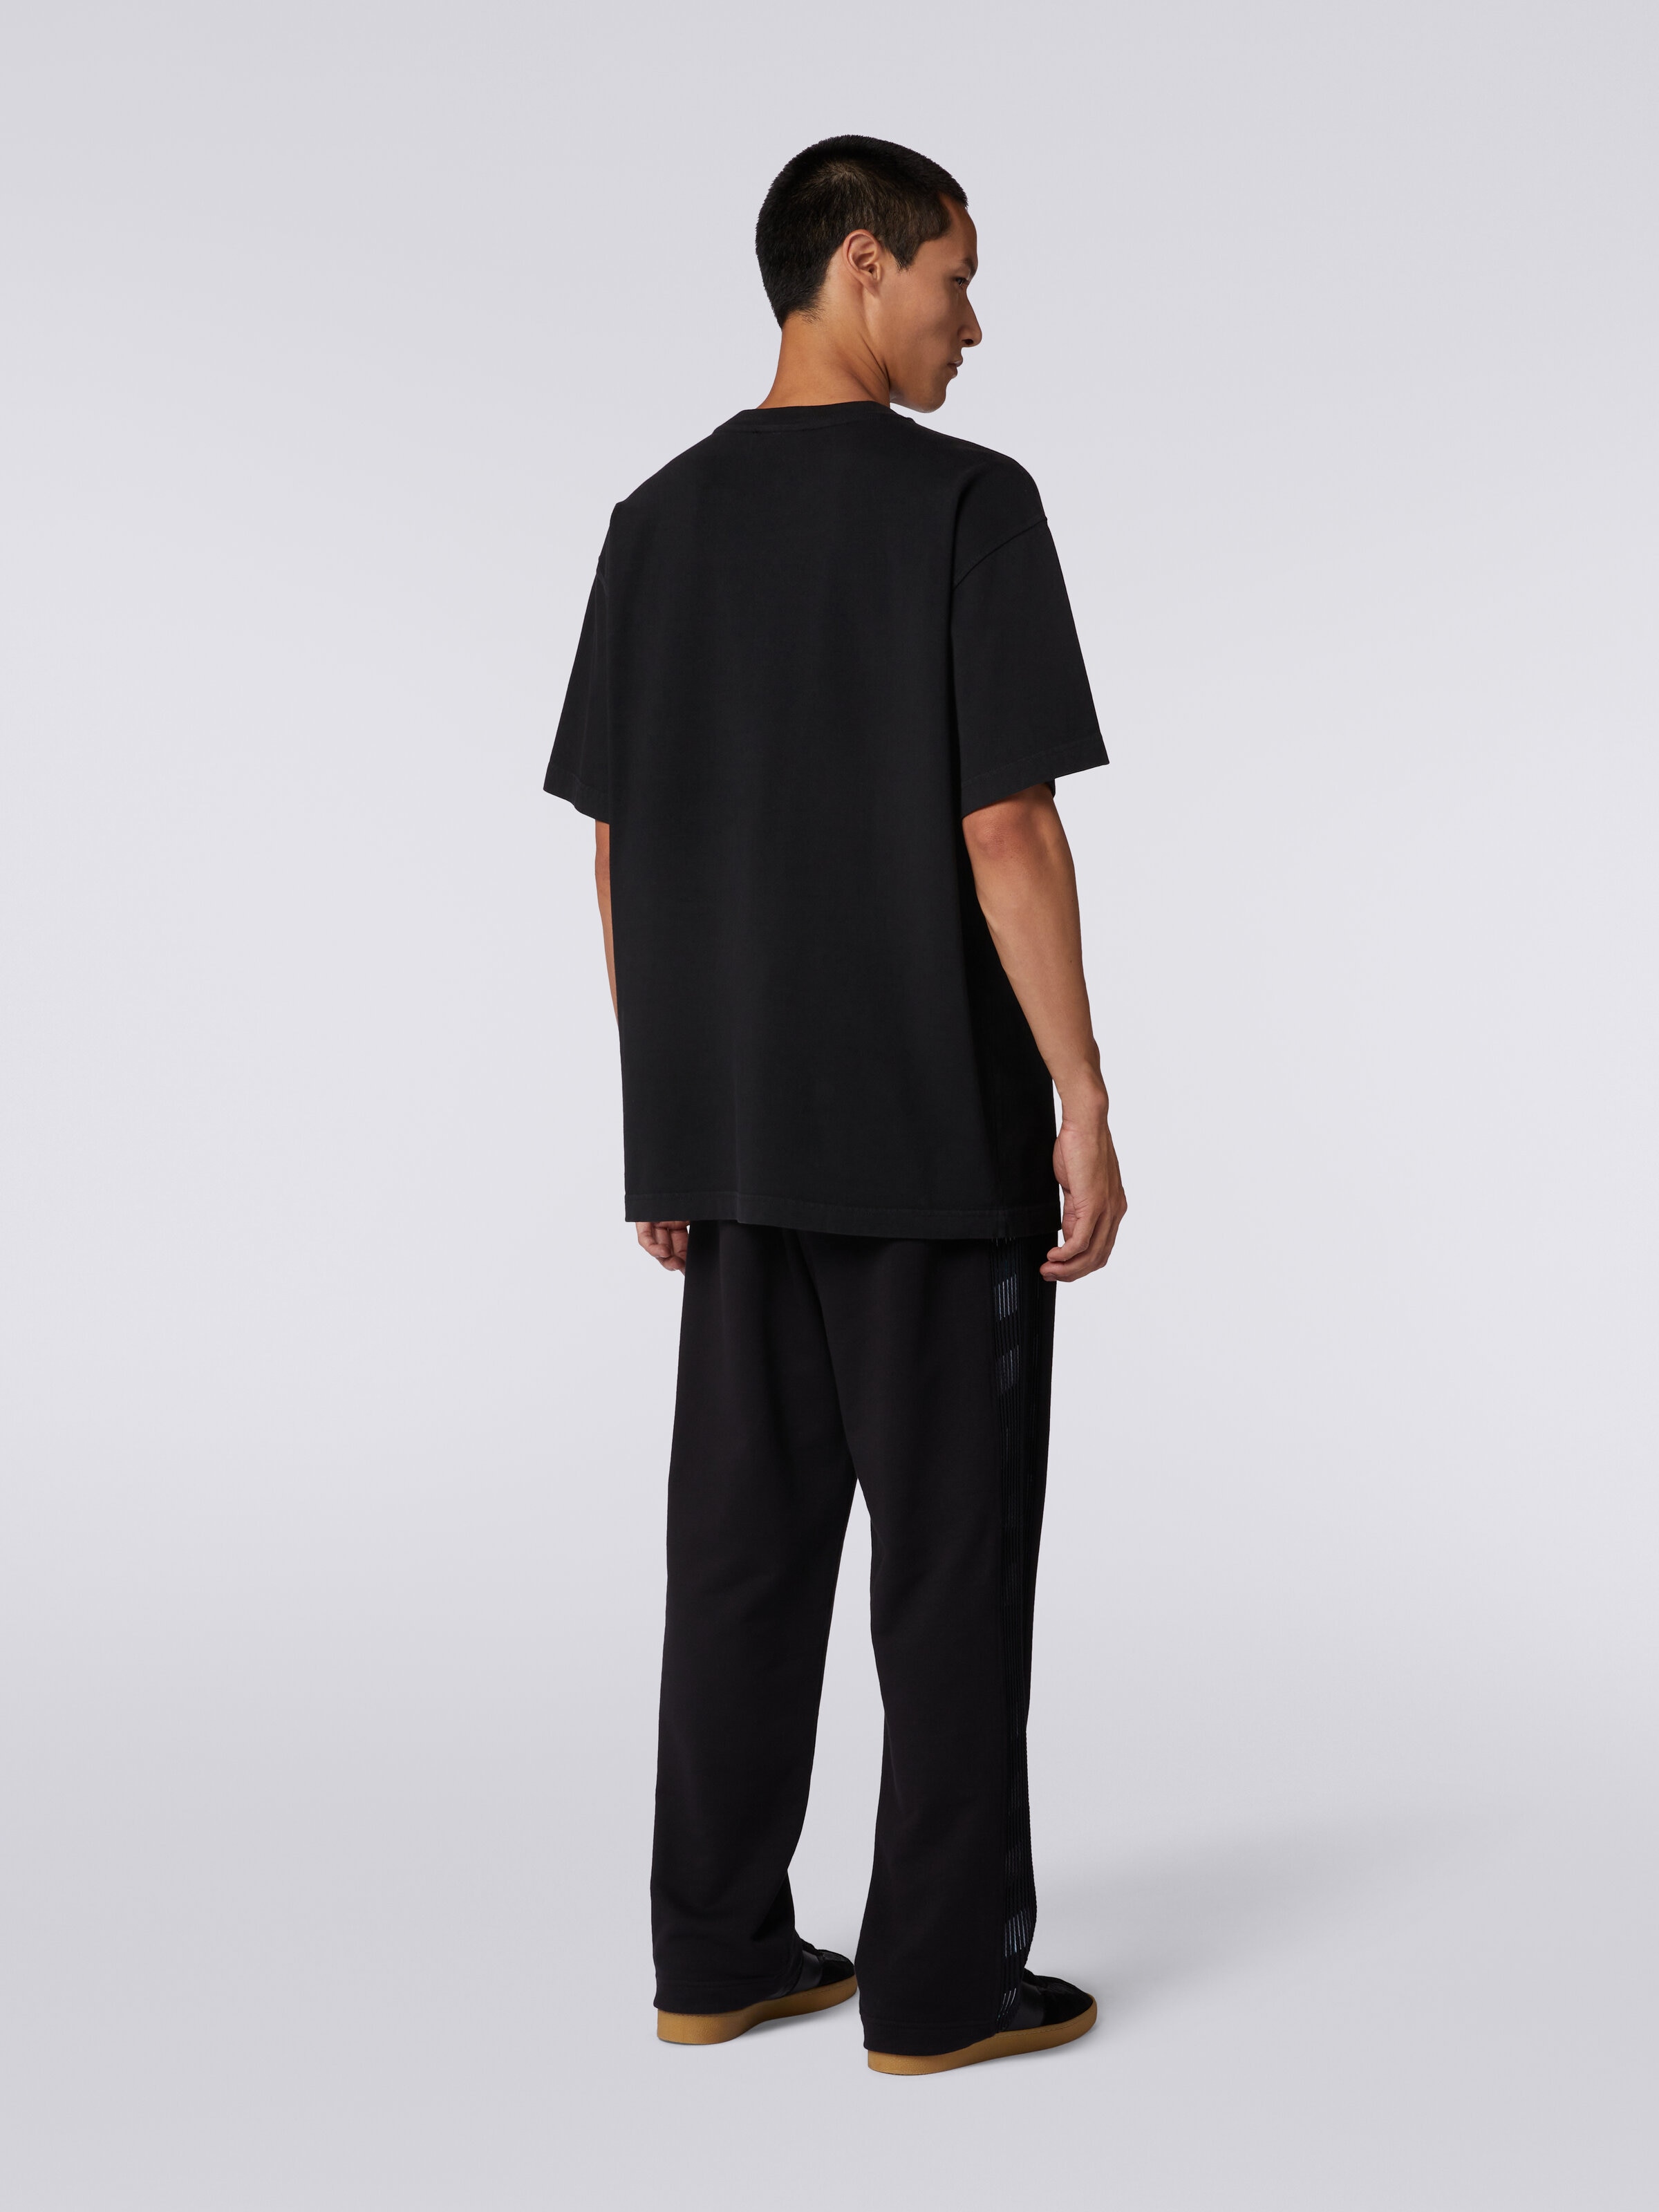 Trousers in fleece with logo and knitted side bands, Black    - 3